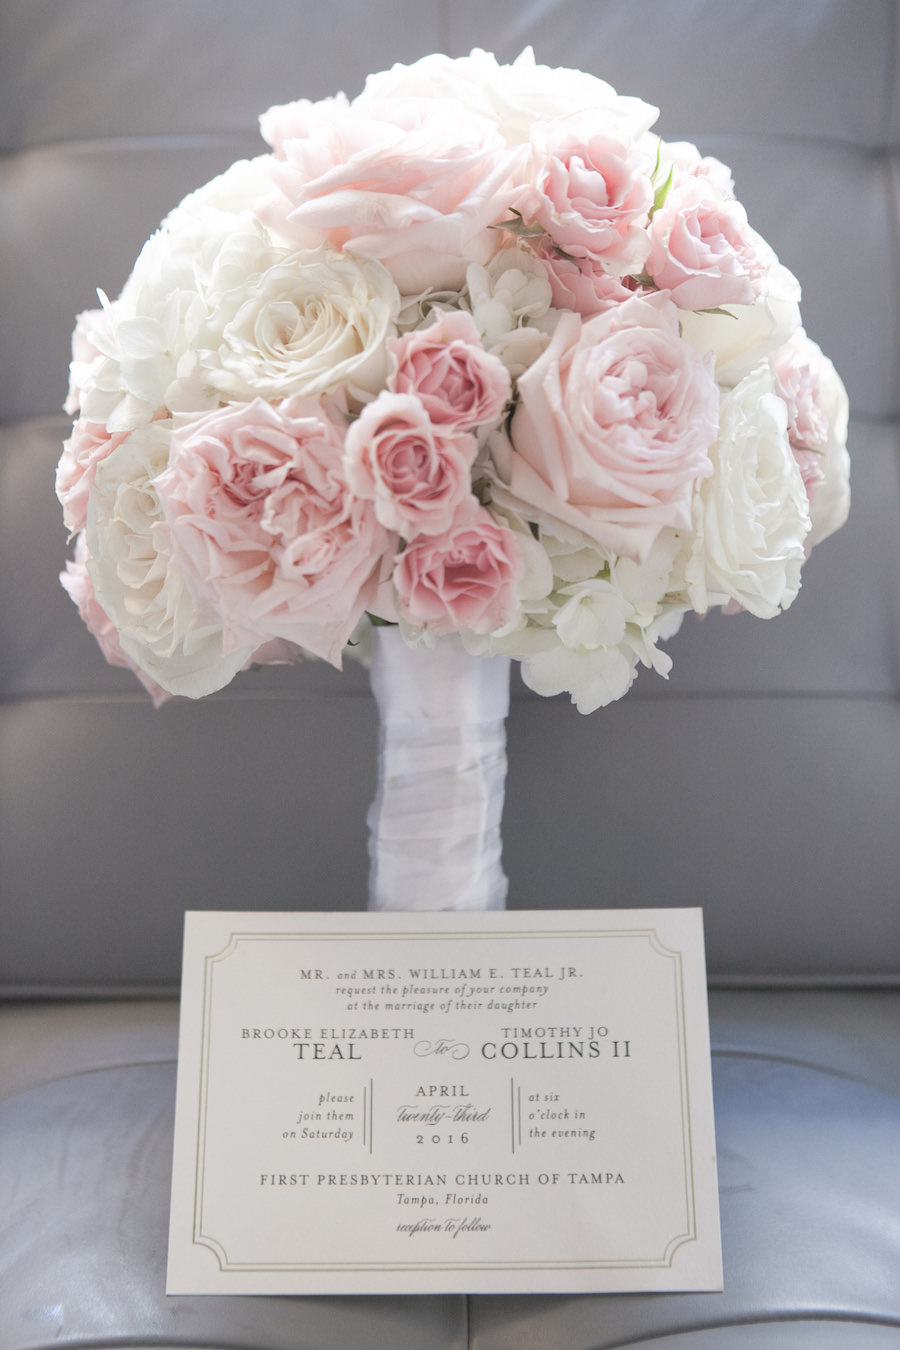 Blush and Ivory Rose and Hydrangea Wedding Bouquet with Elegant, Classic Gold Wedding Invitation | Tampa Wedding Photographer Carrie Wildes Photography